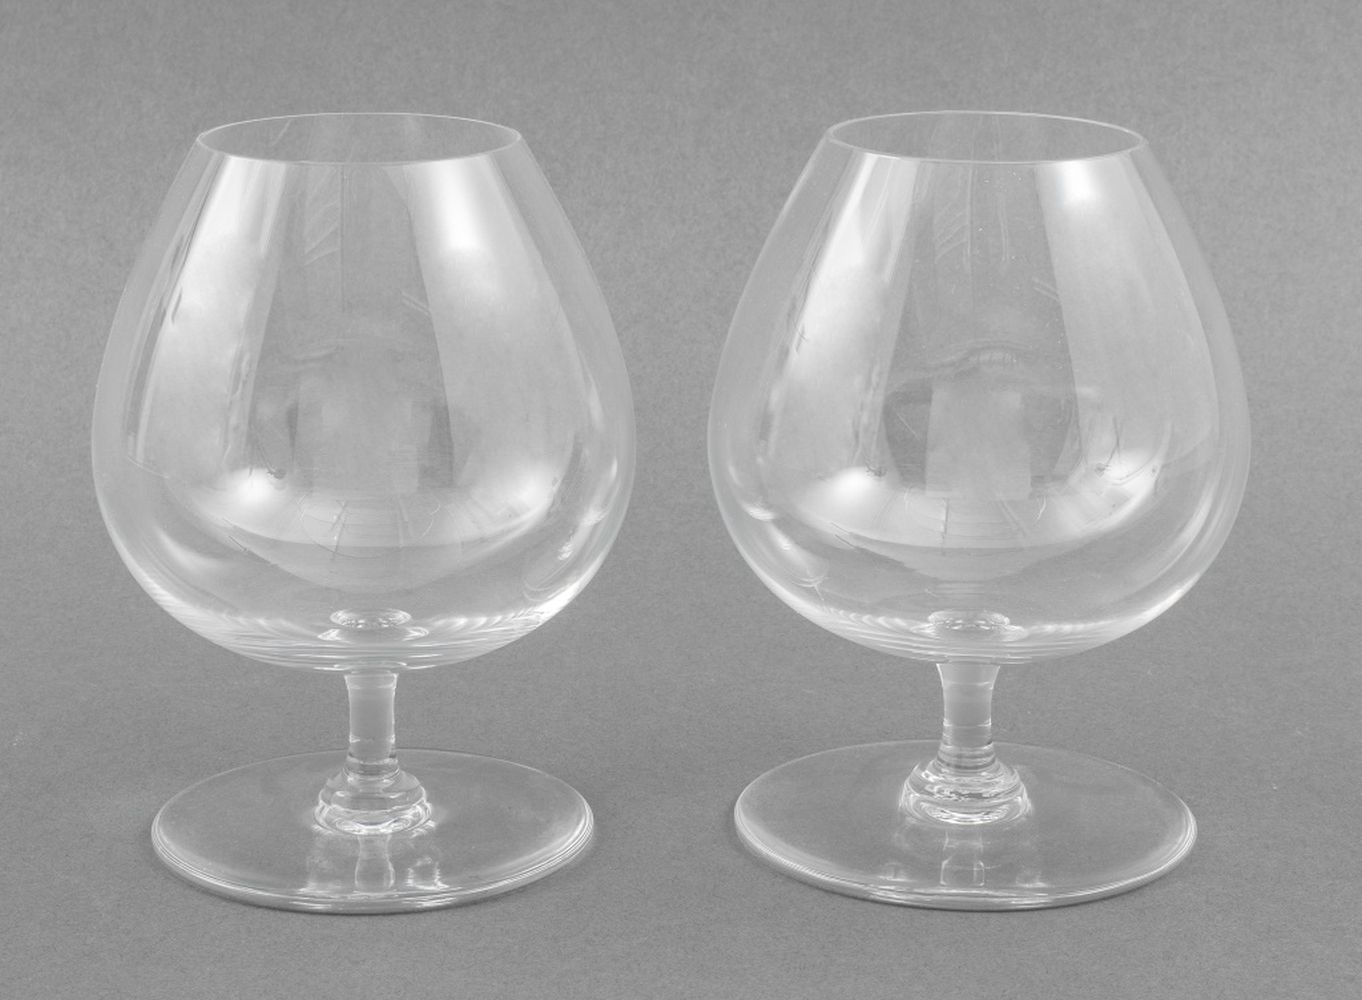 BACCARAT CRYSTAL SNIFTER GLASSES  3ceef0